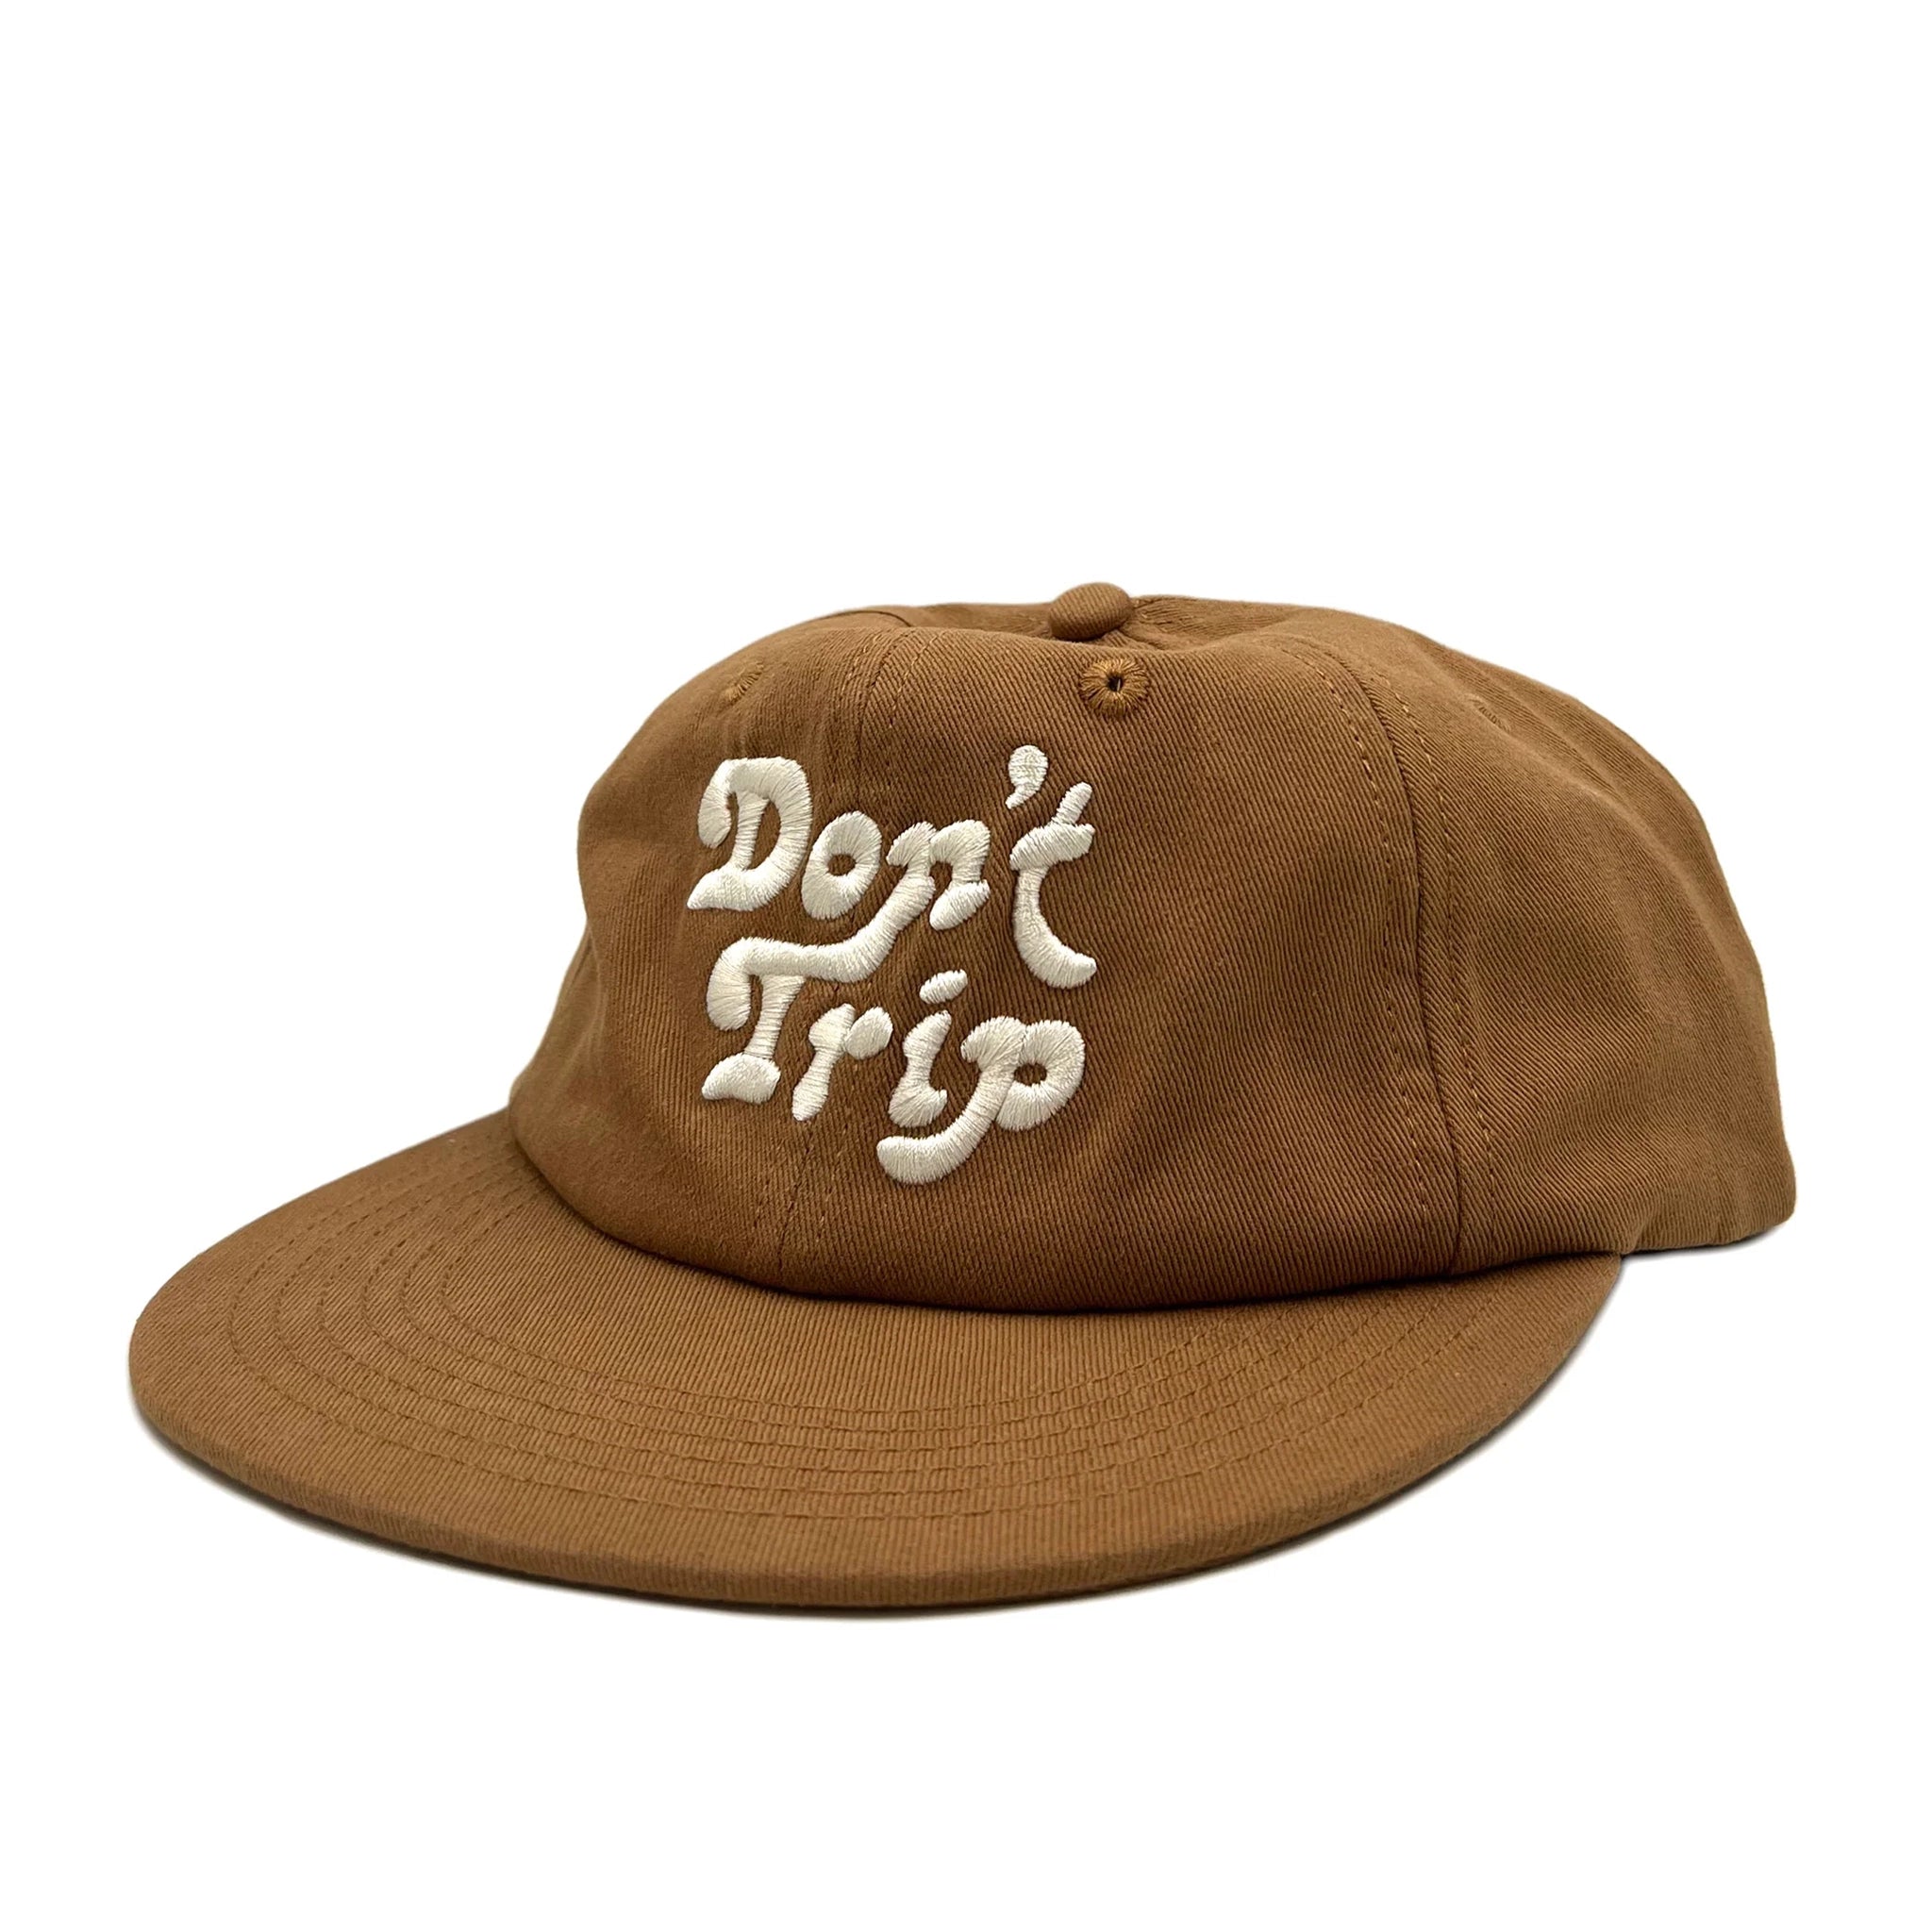 On a white background is a brown unstructured 6 panel baseball hat with white embroidery that reads, "Don't Trip".